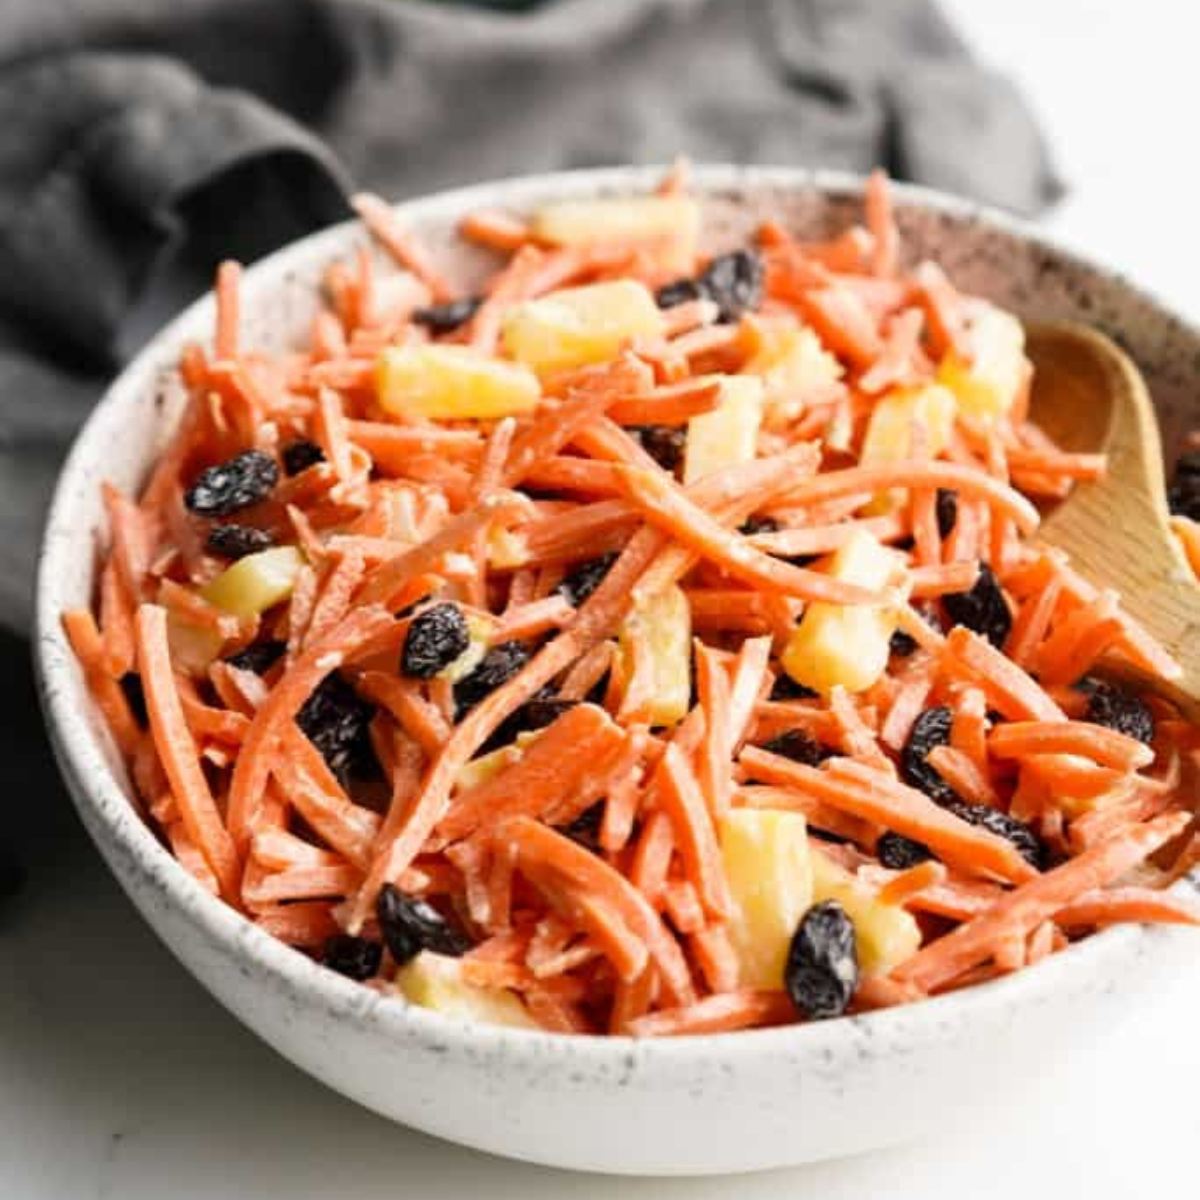 Carrot and raisin salad in a pretty white serving bowl.